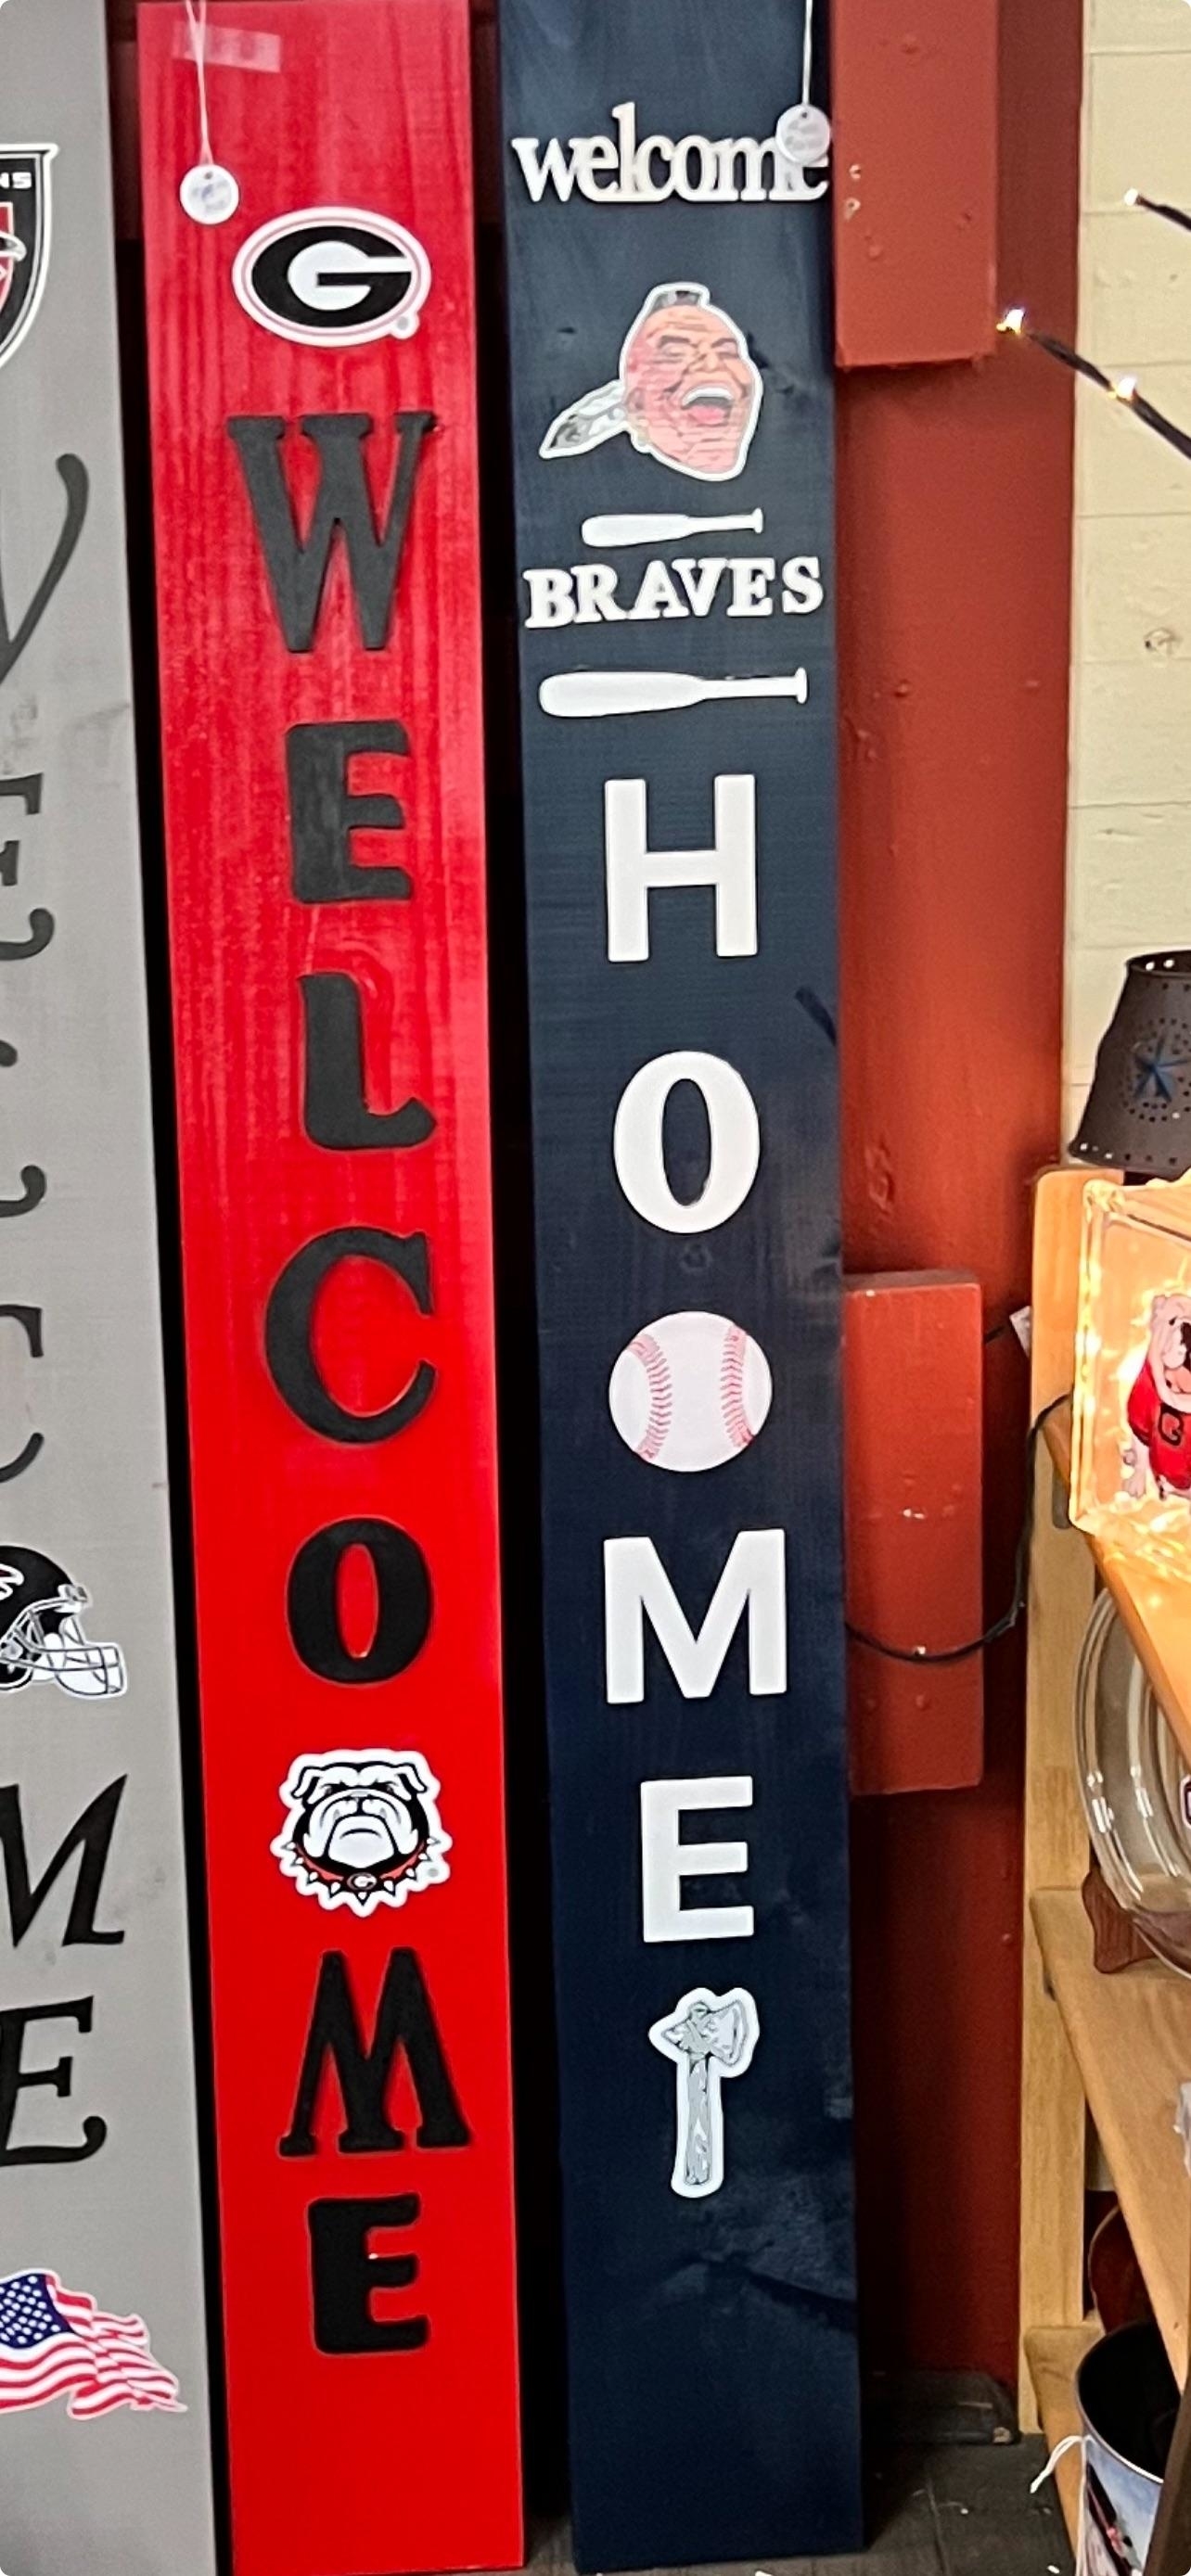 one sign that reads &quot;welcome&quot; with an image of a bulldog after the &quot;o&quot; and another that reads &quot;home&quot; with a baseball after the &quot;o&quot;